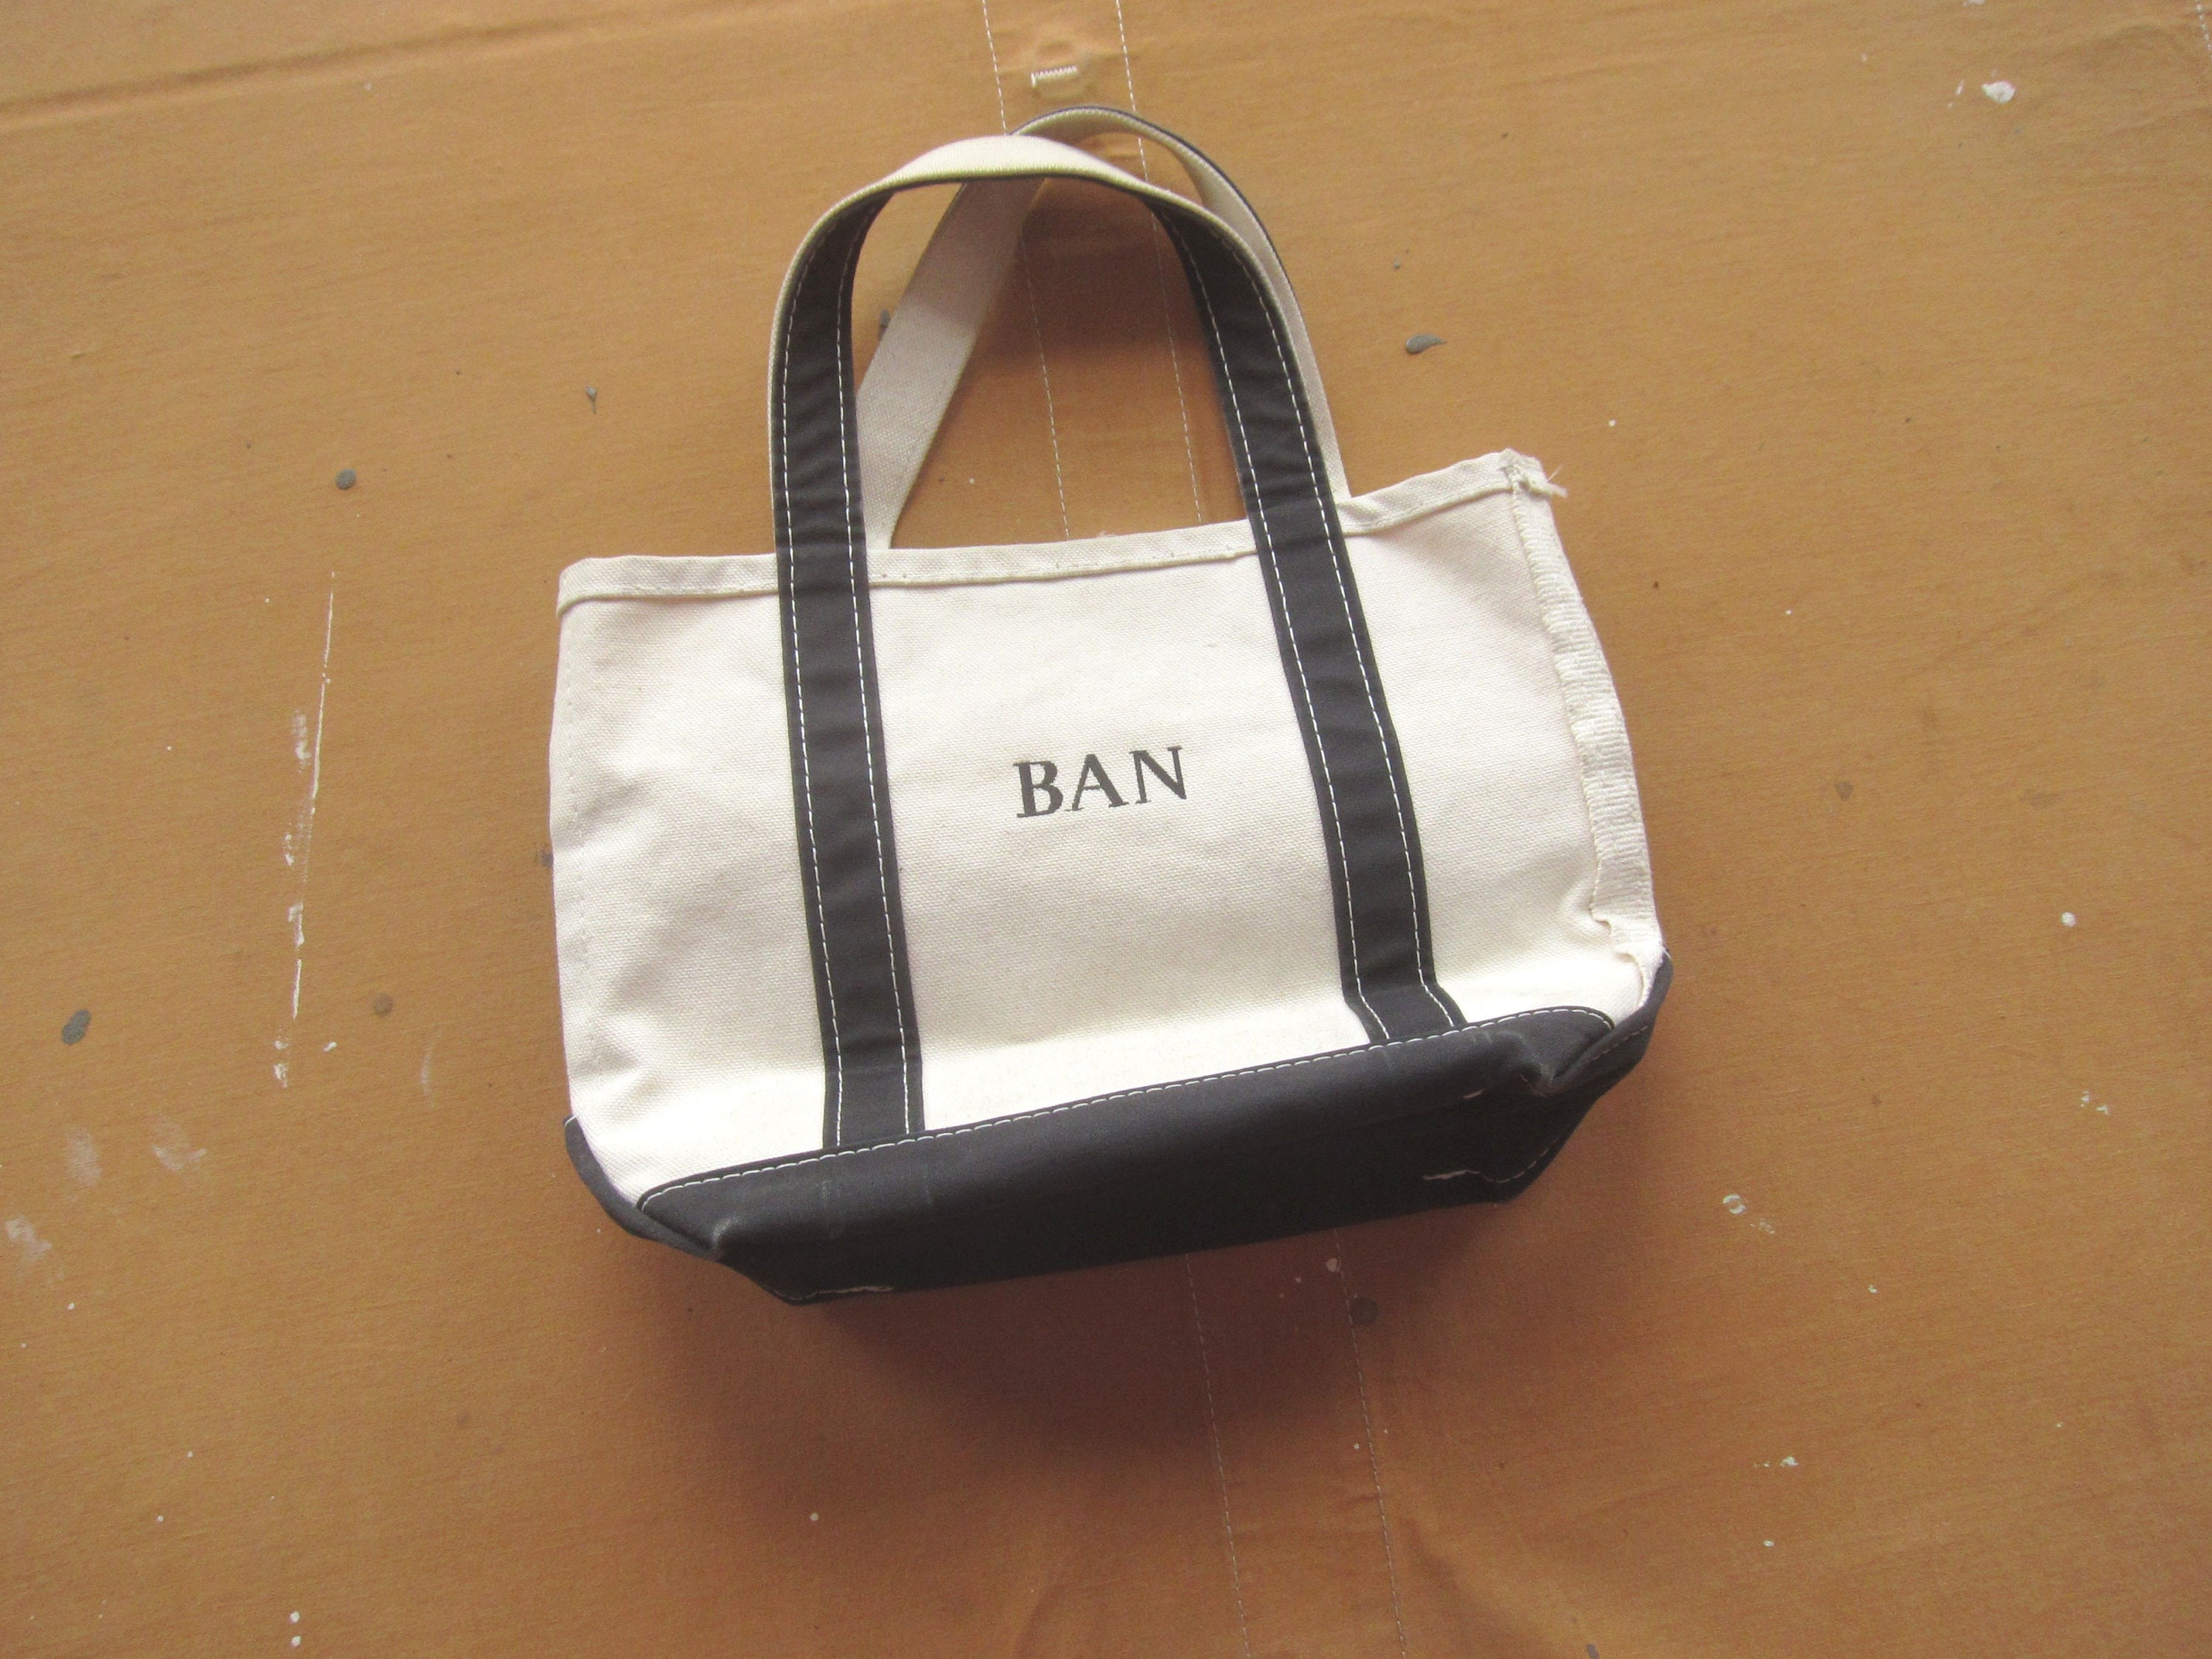 Buy Small LL Bean Boat & Tote Canvas Bag / Black Made in USA